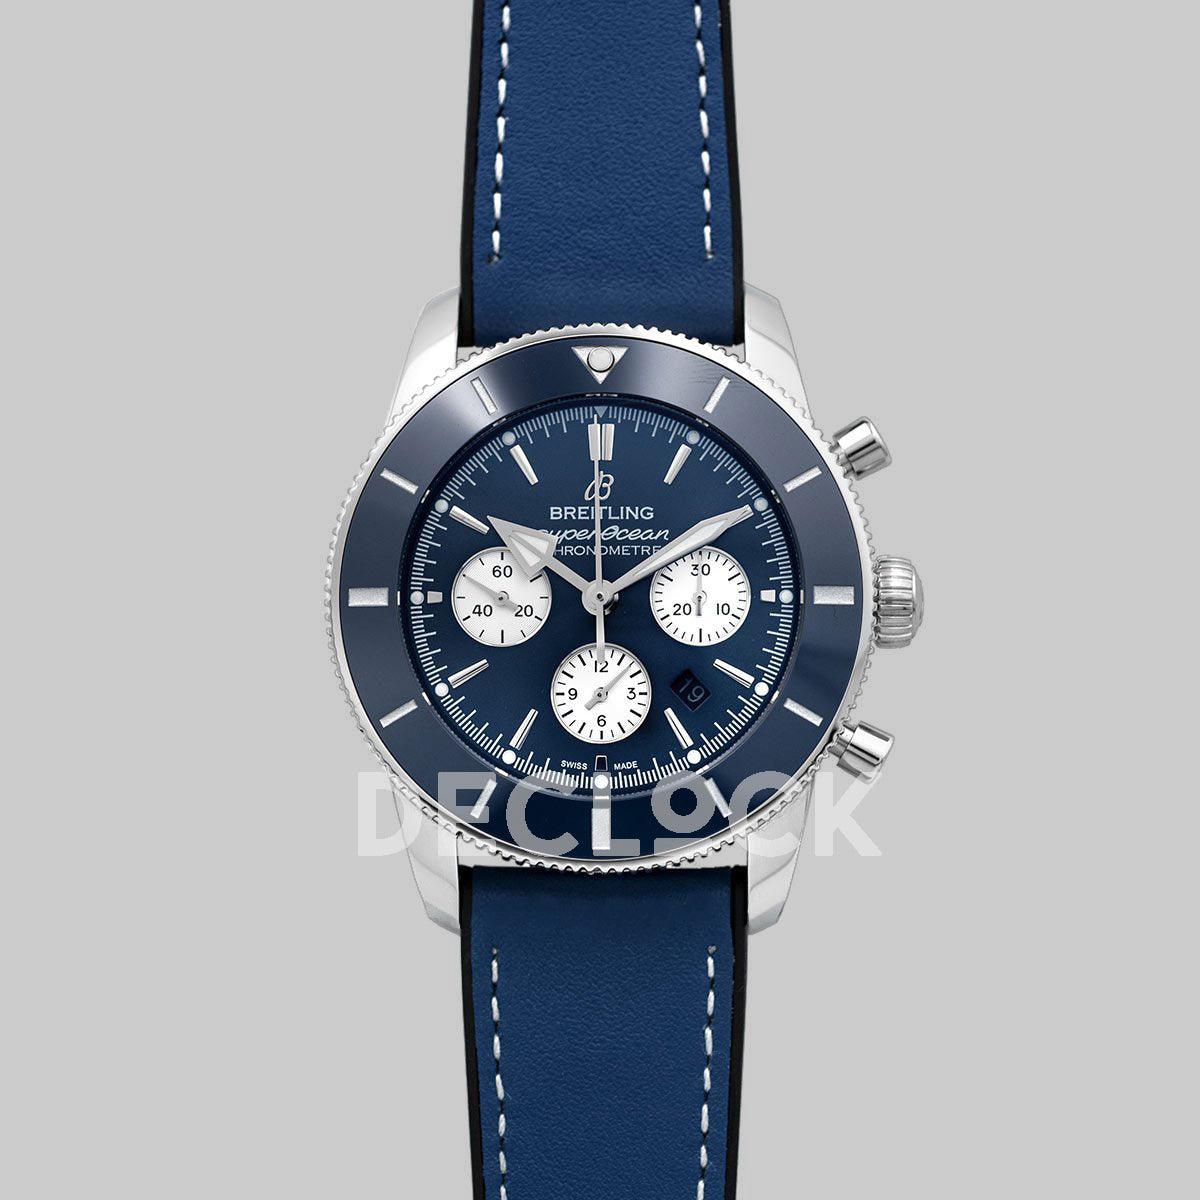 Replica Breitling Superocean Heritage II B01 Chronograph in Blue Dial on Steel on Blue Leather Strap - Replica Watches